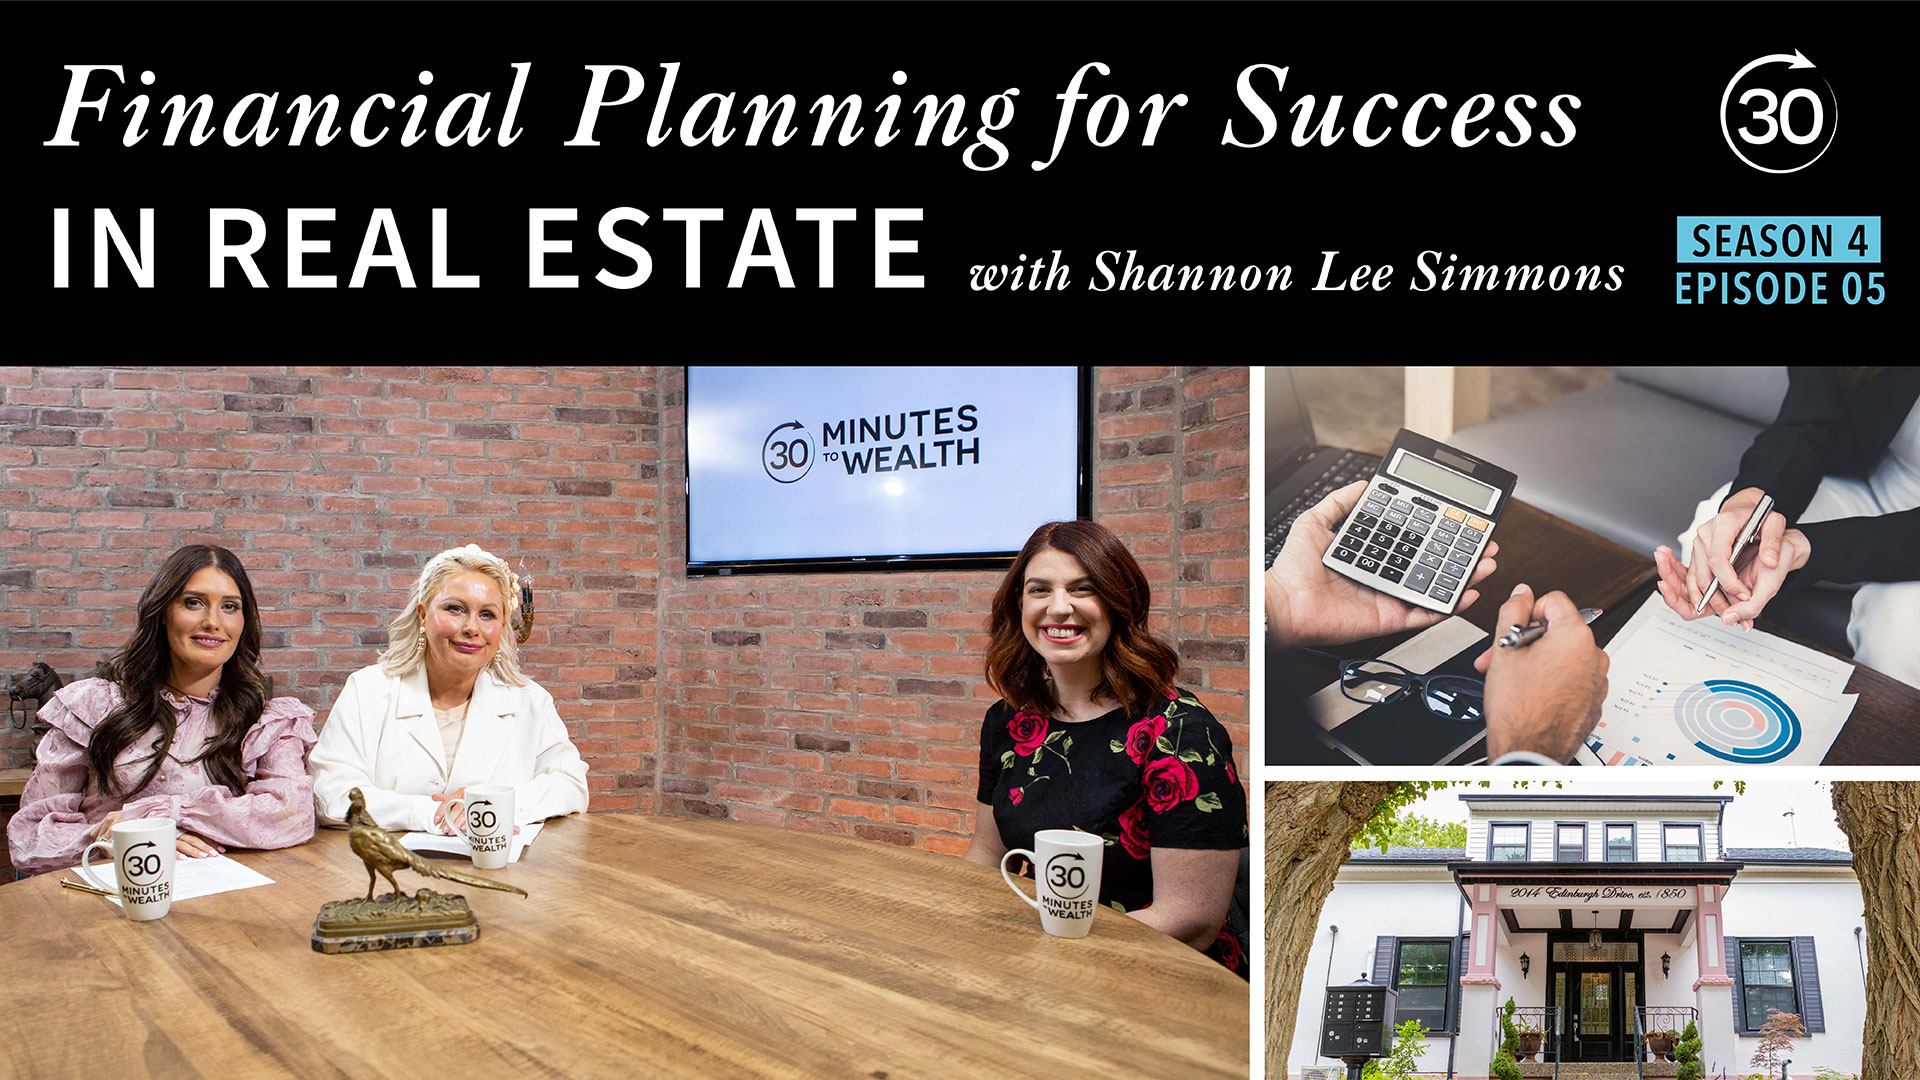 S4 E5 - Financial Planning for Success in Real Estate